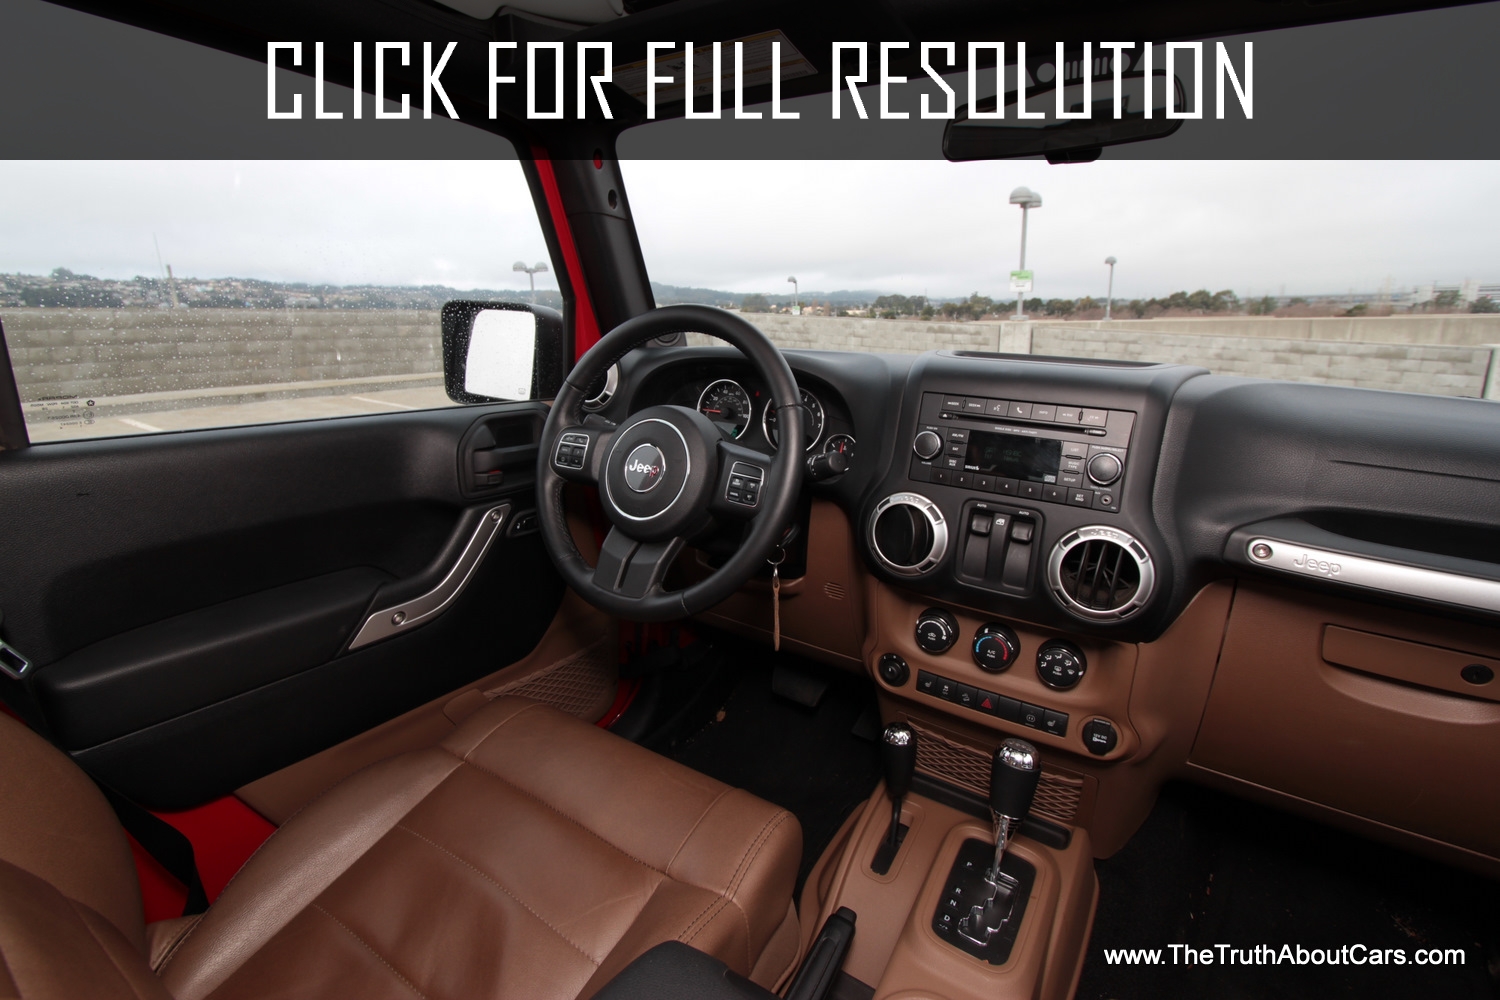 2004 Jeep Wrangler Rubicon Best Image Gallery 13 23 Share